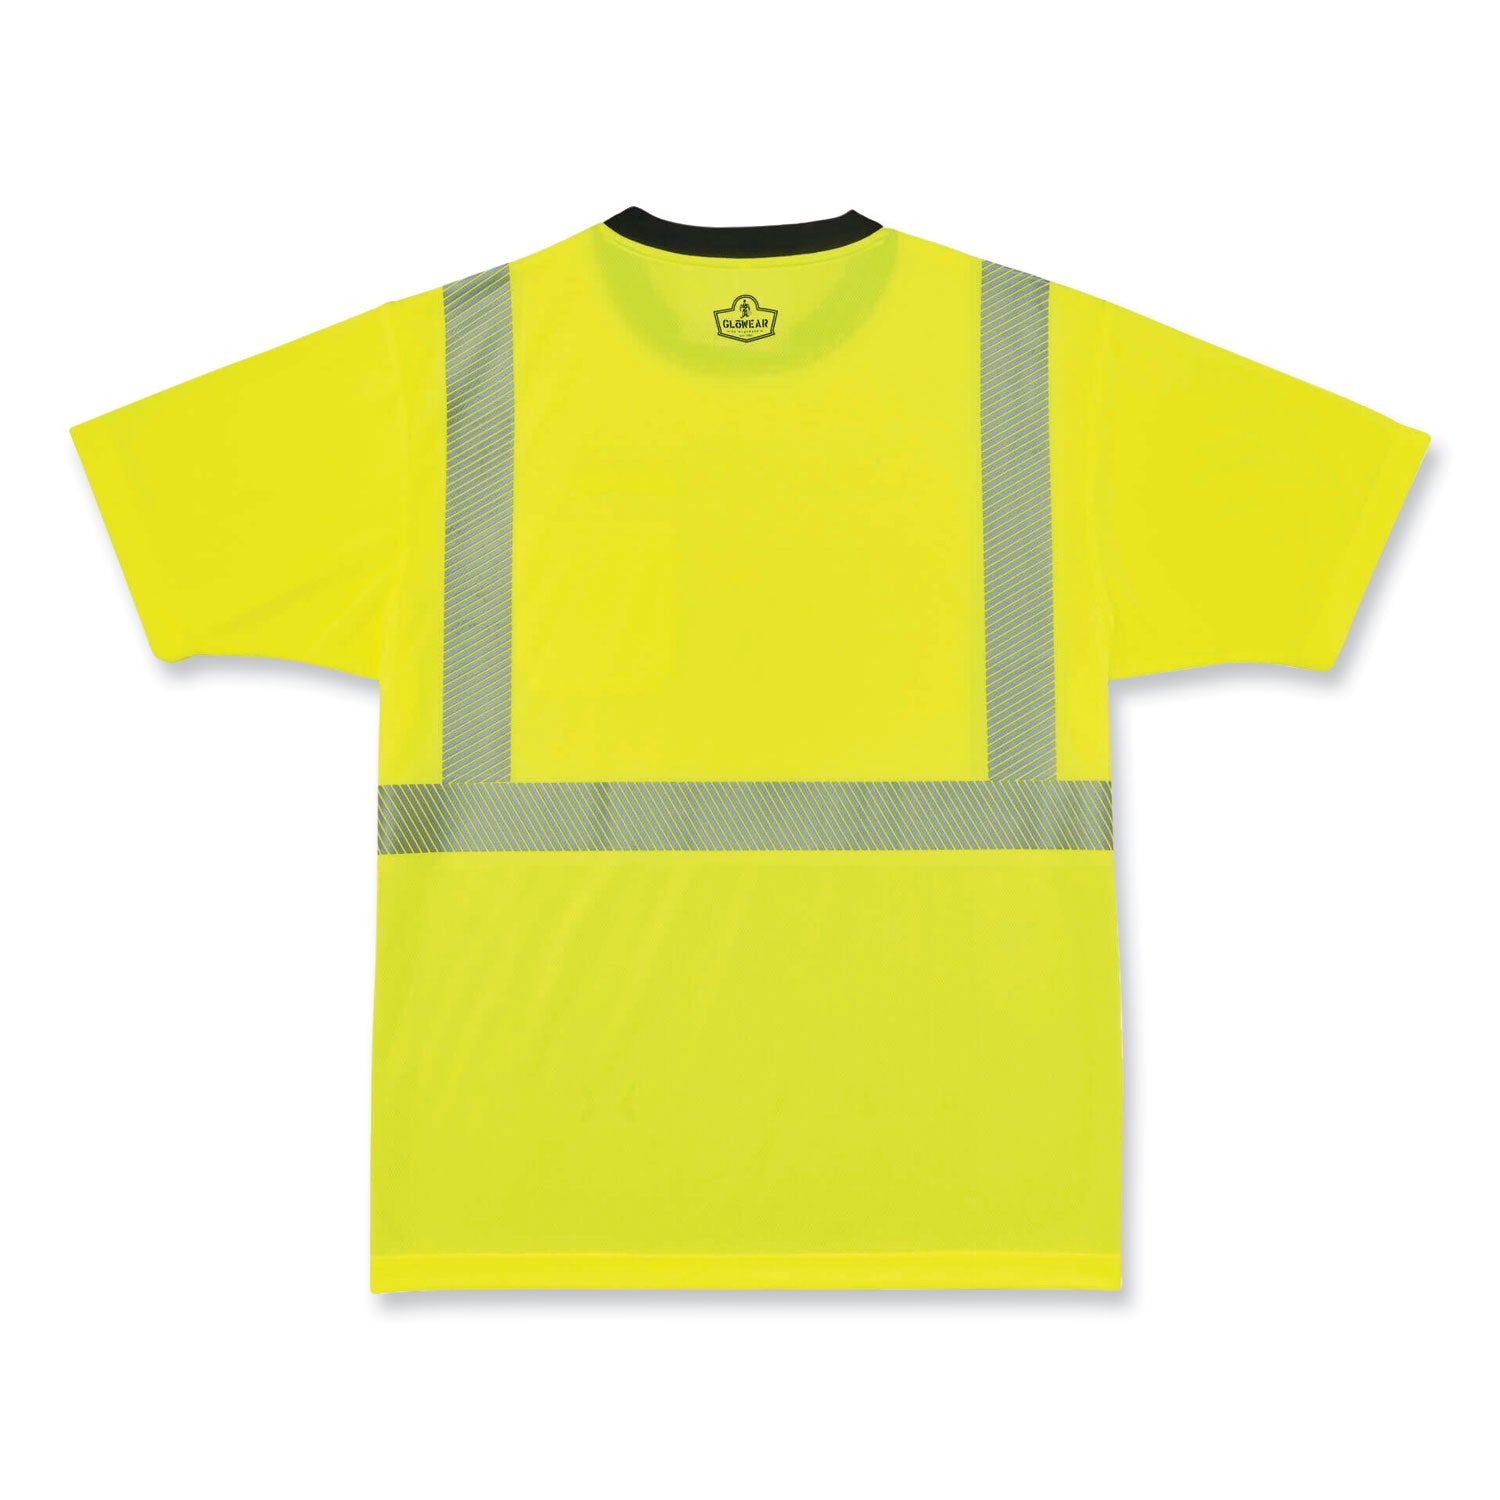 glowear-8280bk-class-2-performance-t-shirt-with-black-bottom-polyester-3x-large-lime-ships-in-1-3-business-days_ego22537 - 2